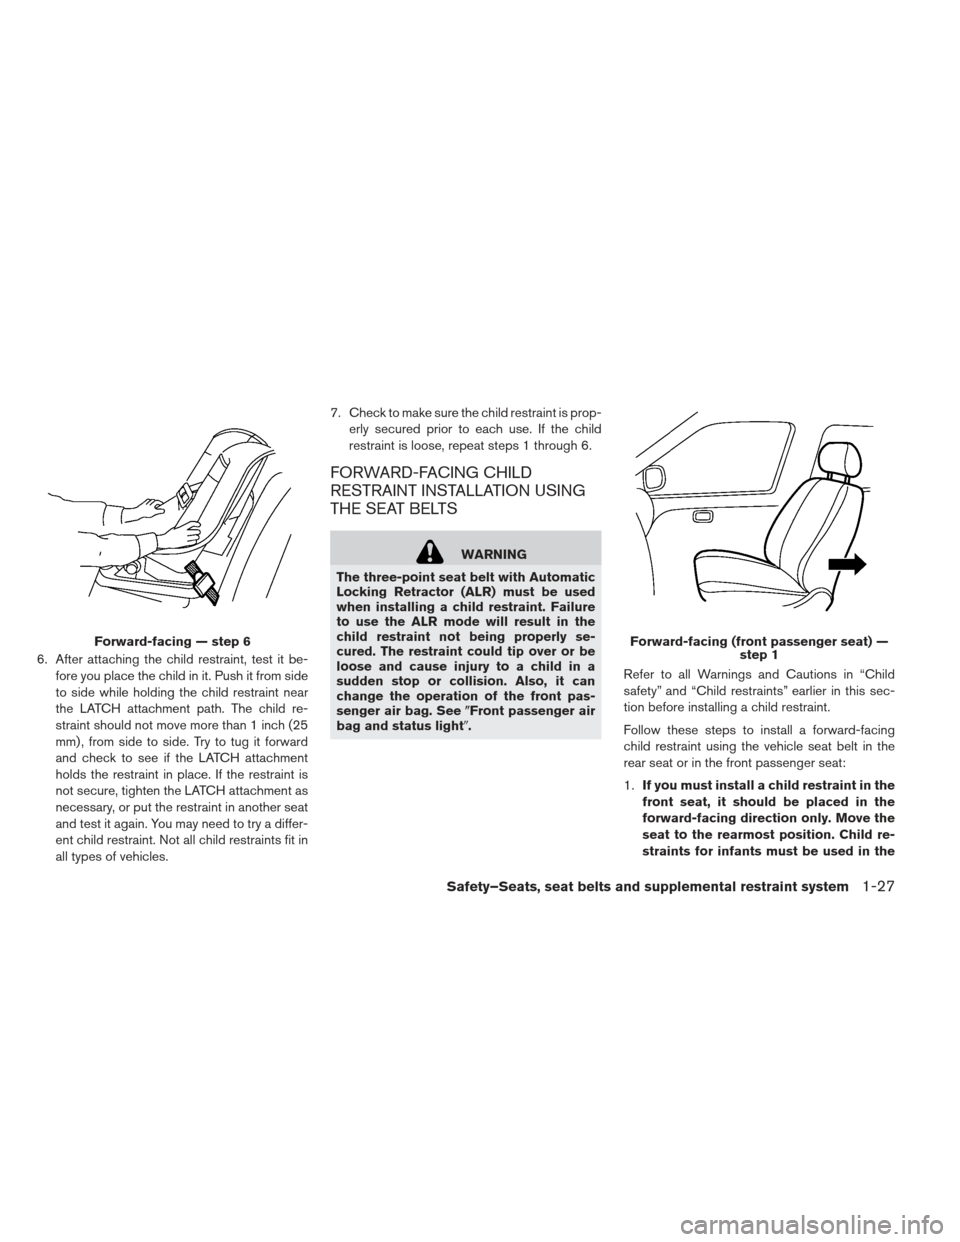 NISSAN LEAF 2013 1.G Owners Manual 6. After attaching the child restraint, test it be-fore you place the child in it. Push it from side
to side while holding the child restraint near
the LATCH attachment path. The child re-
straint sho